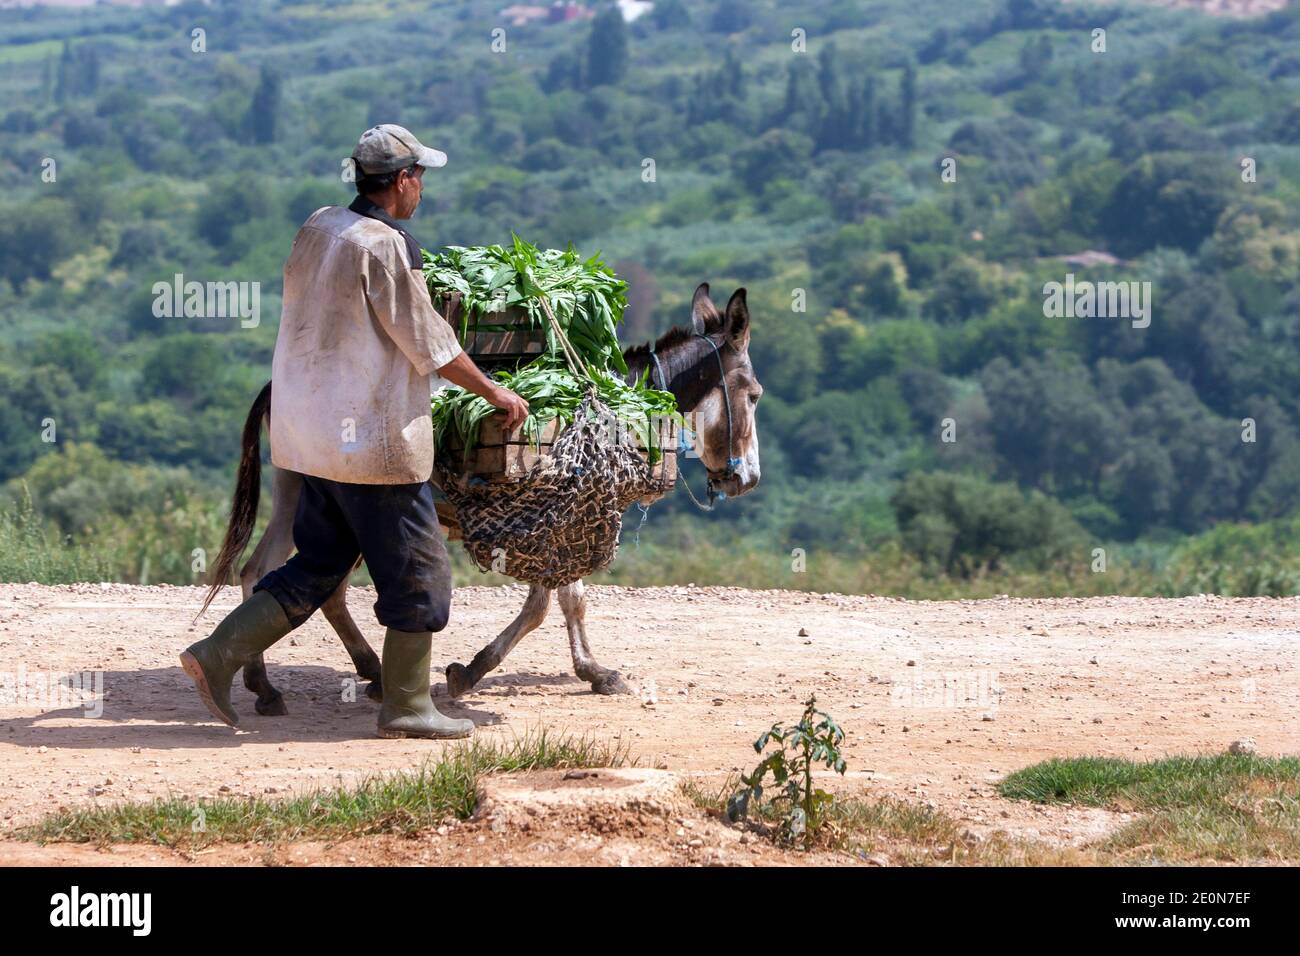 A man with his donkey carrying produce on the outskirts of Meknes in Morocco. Meknes is named after a Berber tribe which, was known as Miknasa. Stock Photo